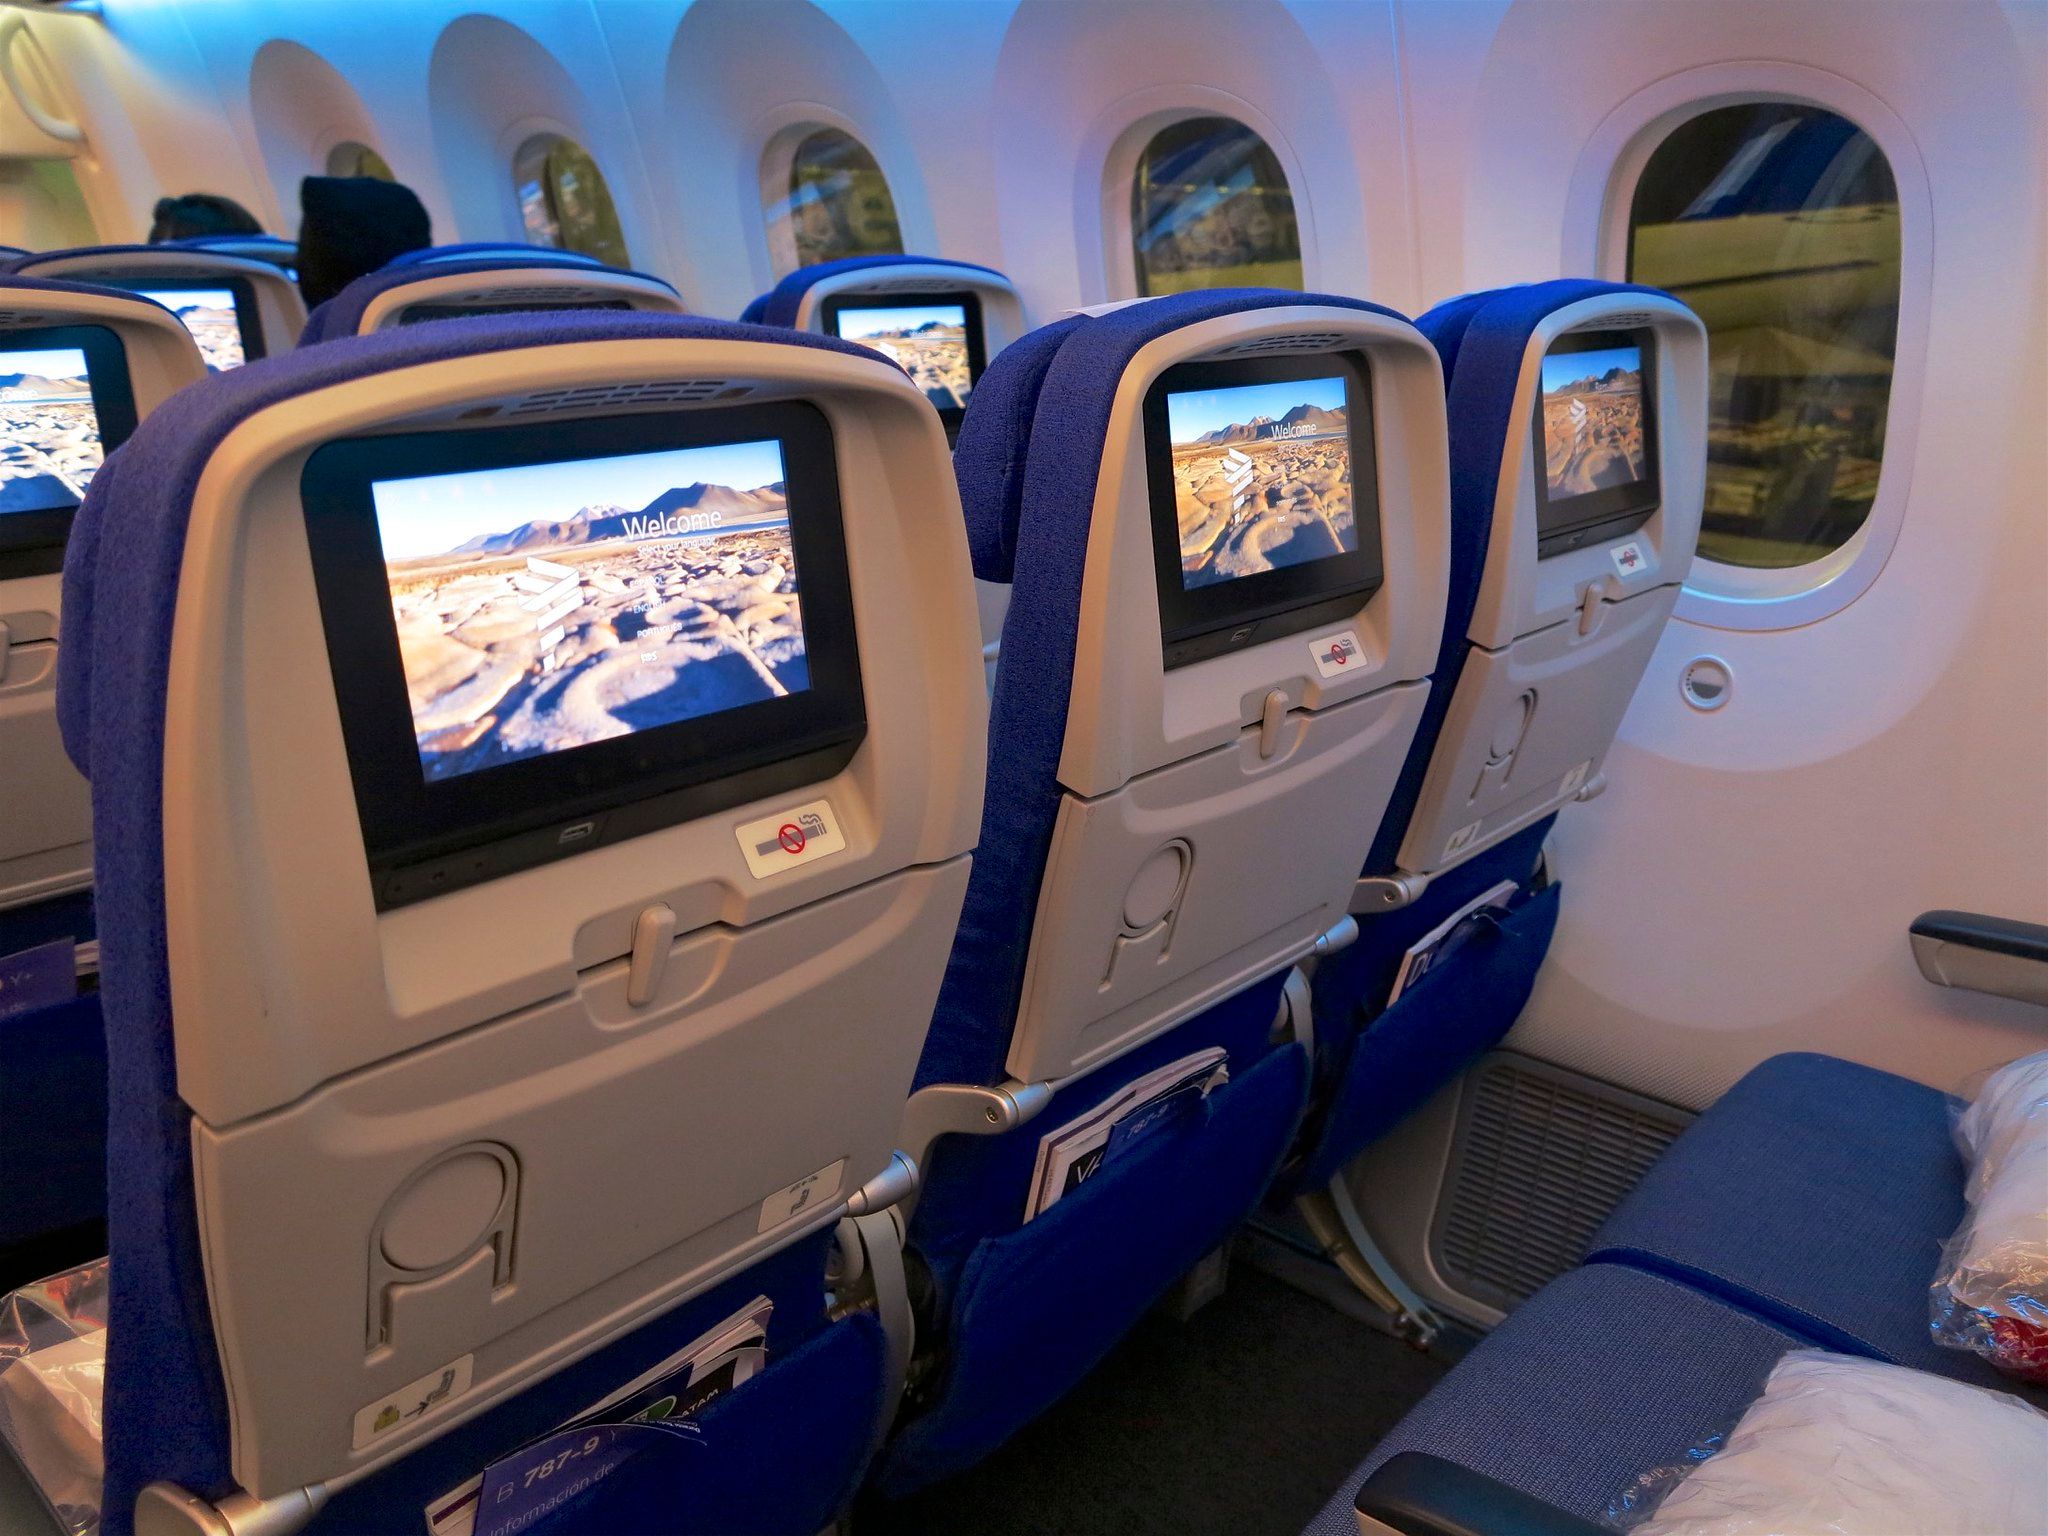 Inside an economy class cabin, focusing on the inflight entertainment screens behind each seat.